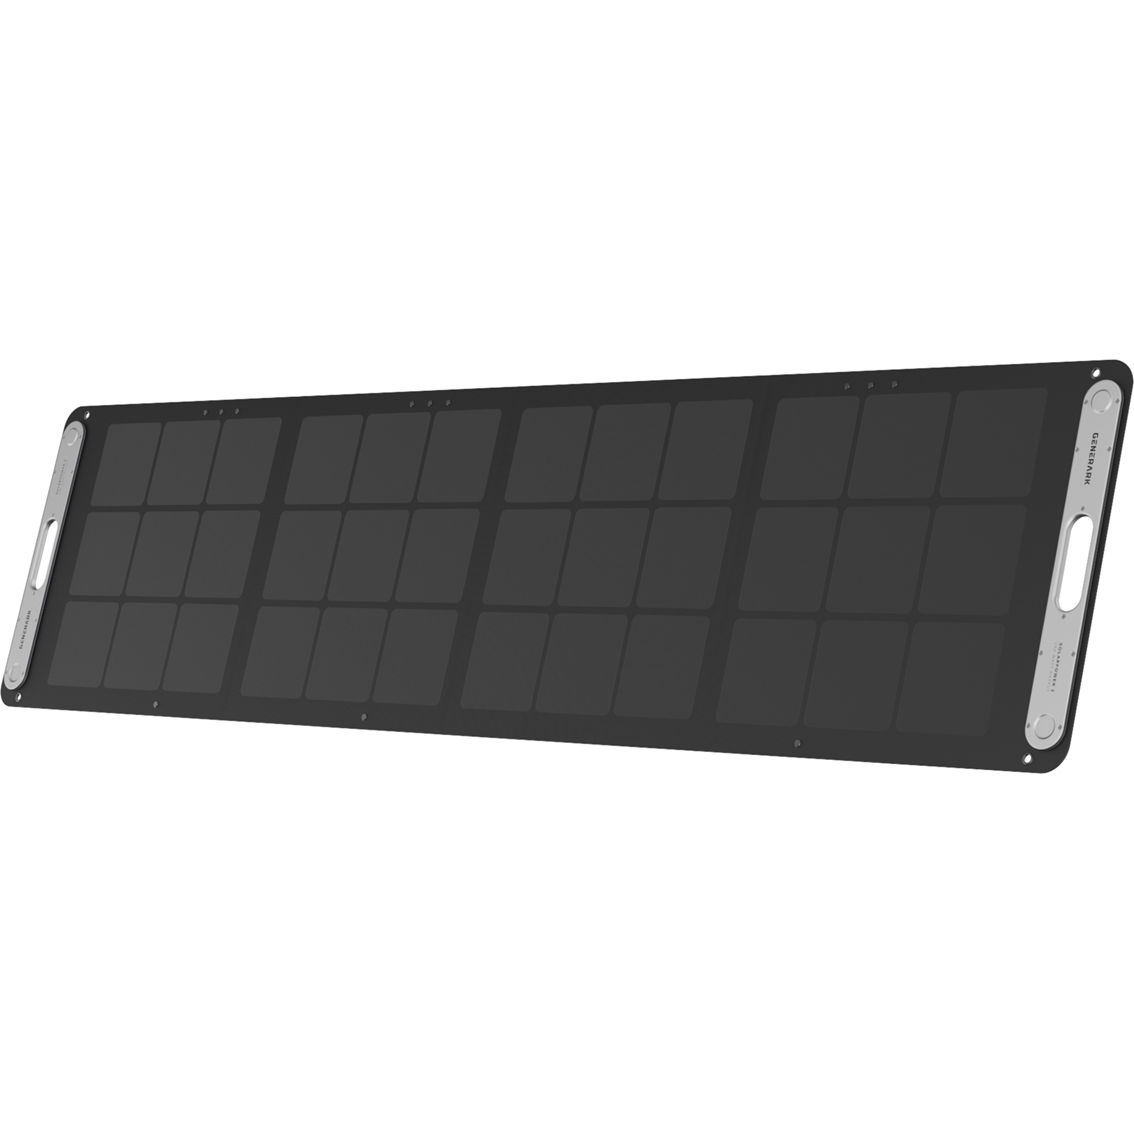 Geneverse SolarPower 2: All-Weather Portable Solar Panel - Image 3 of 8